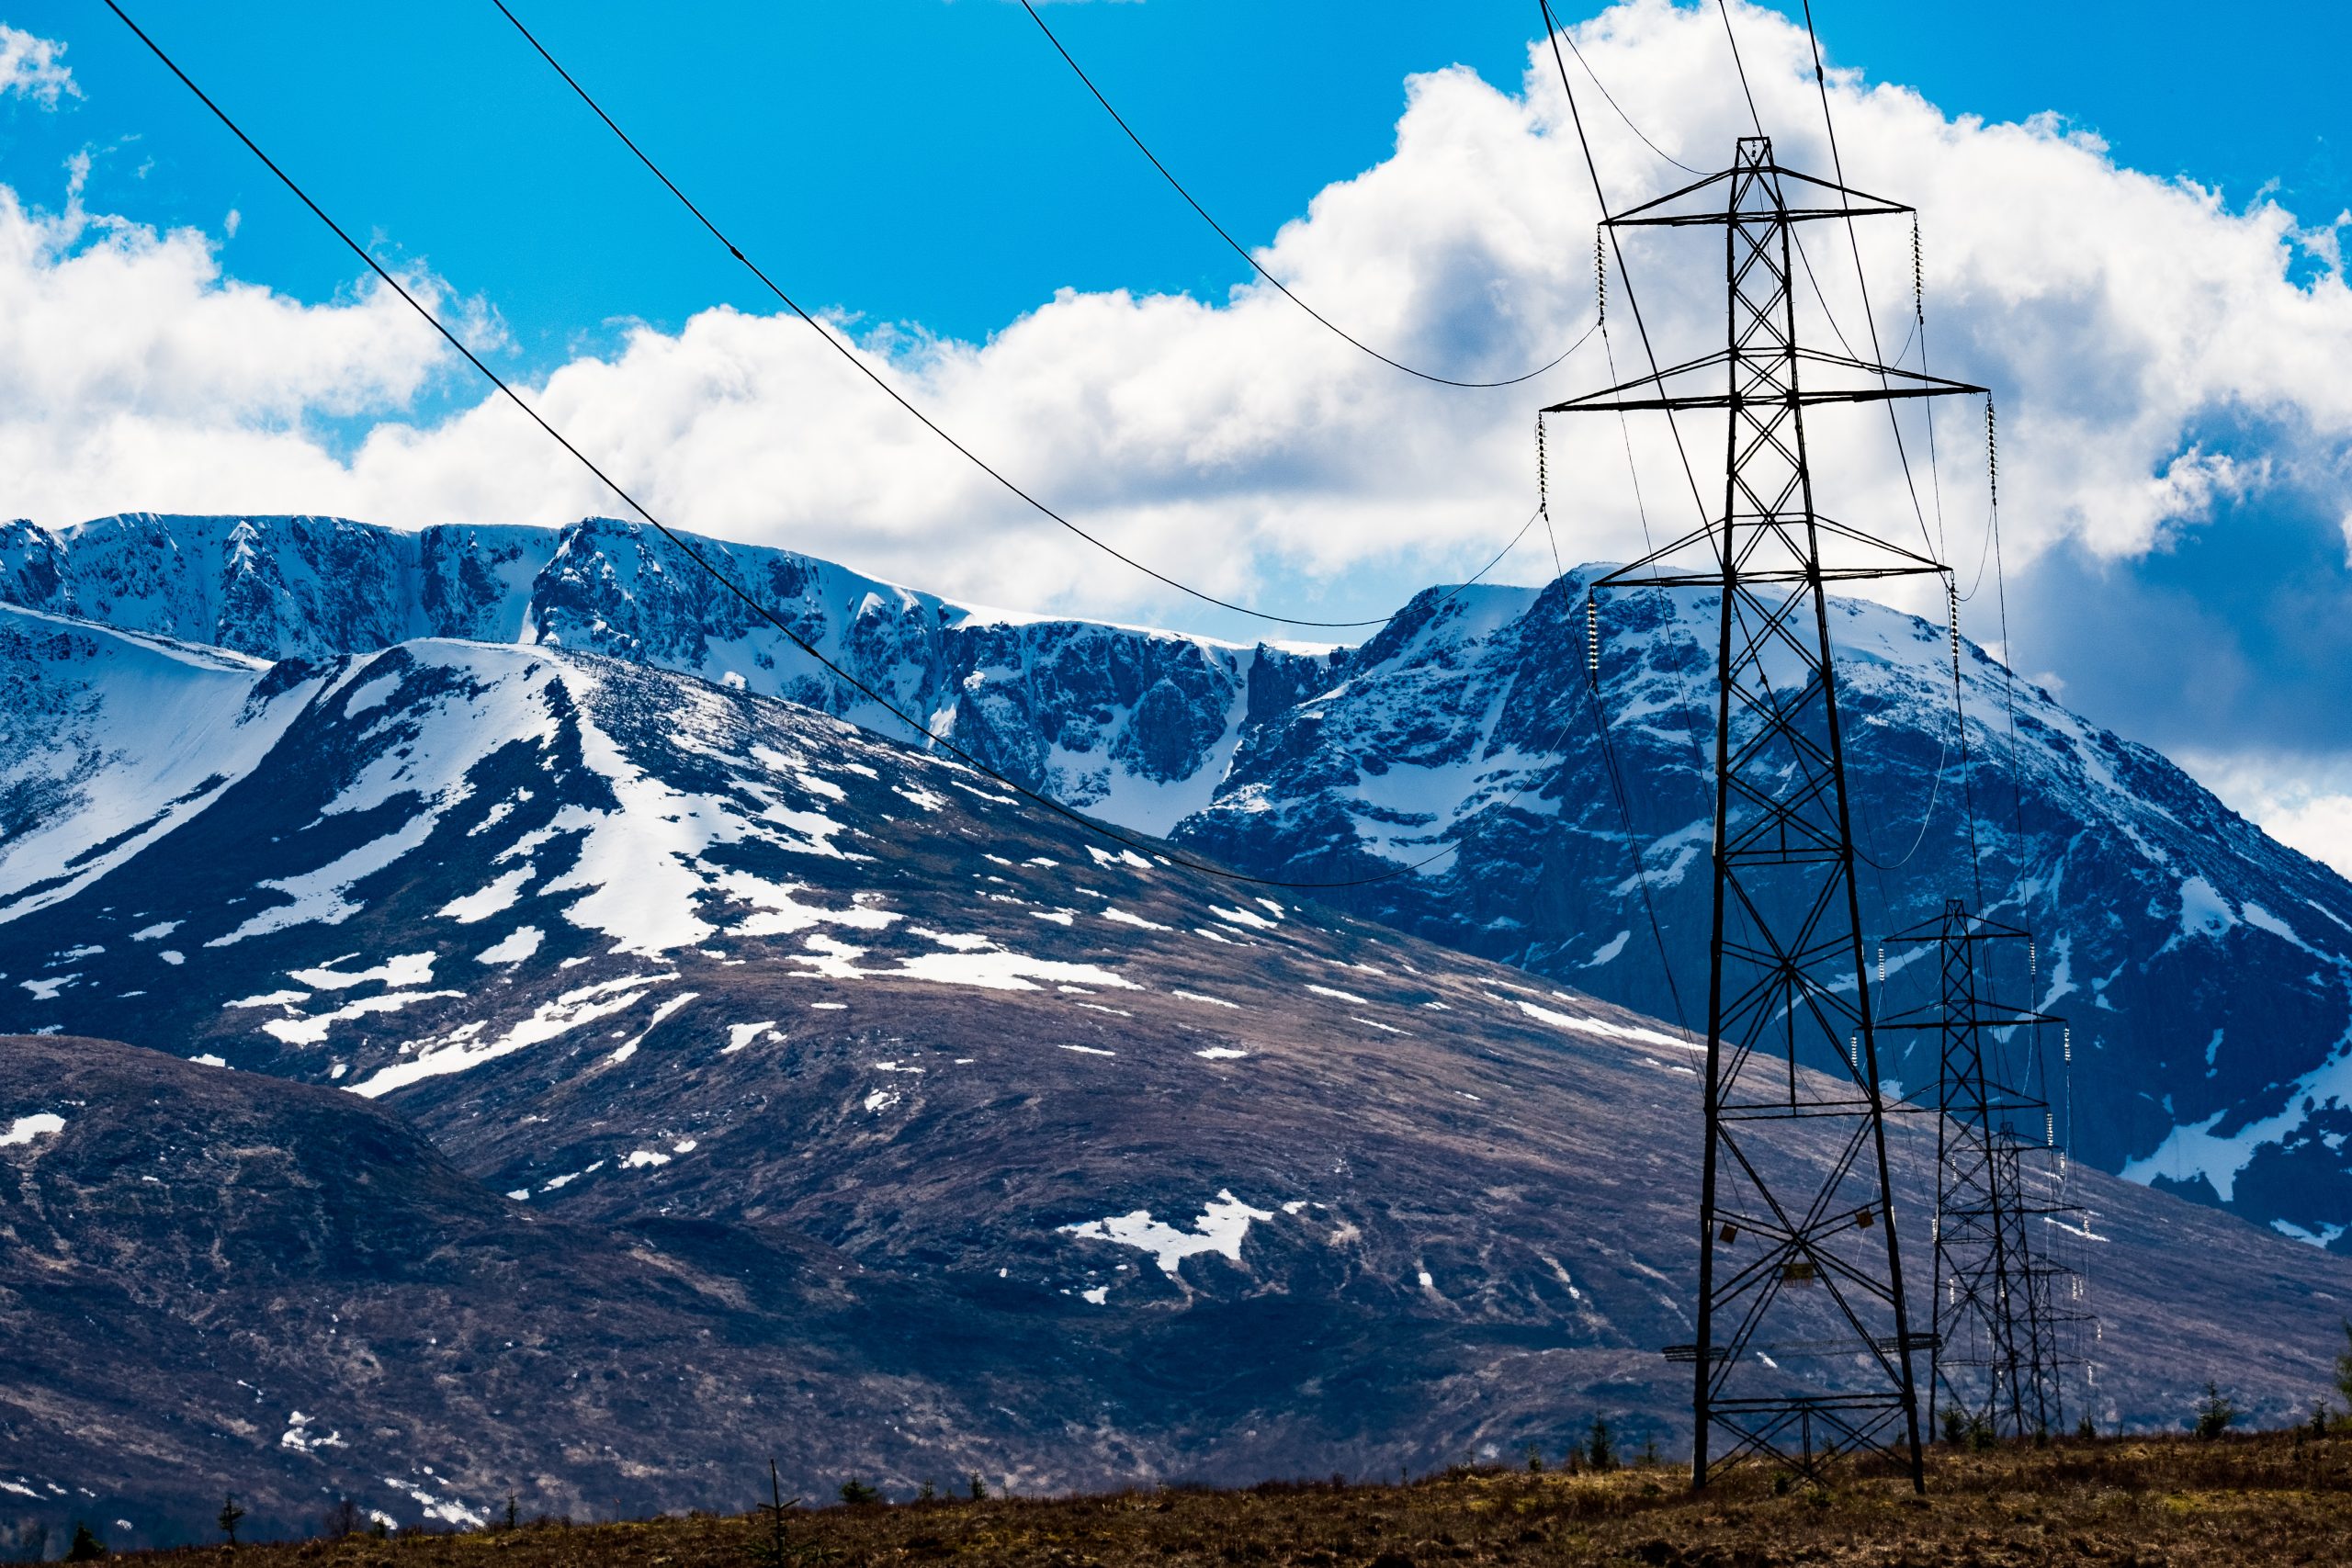 Snow capped hills wiht clear blue skies and electrcicity pylons dotted across the lanndscape.